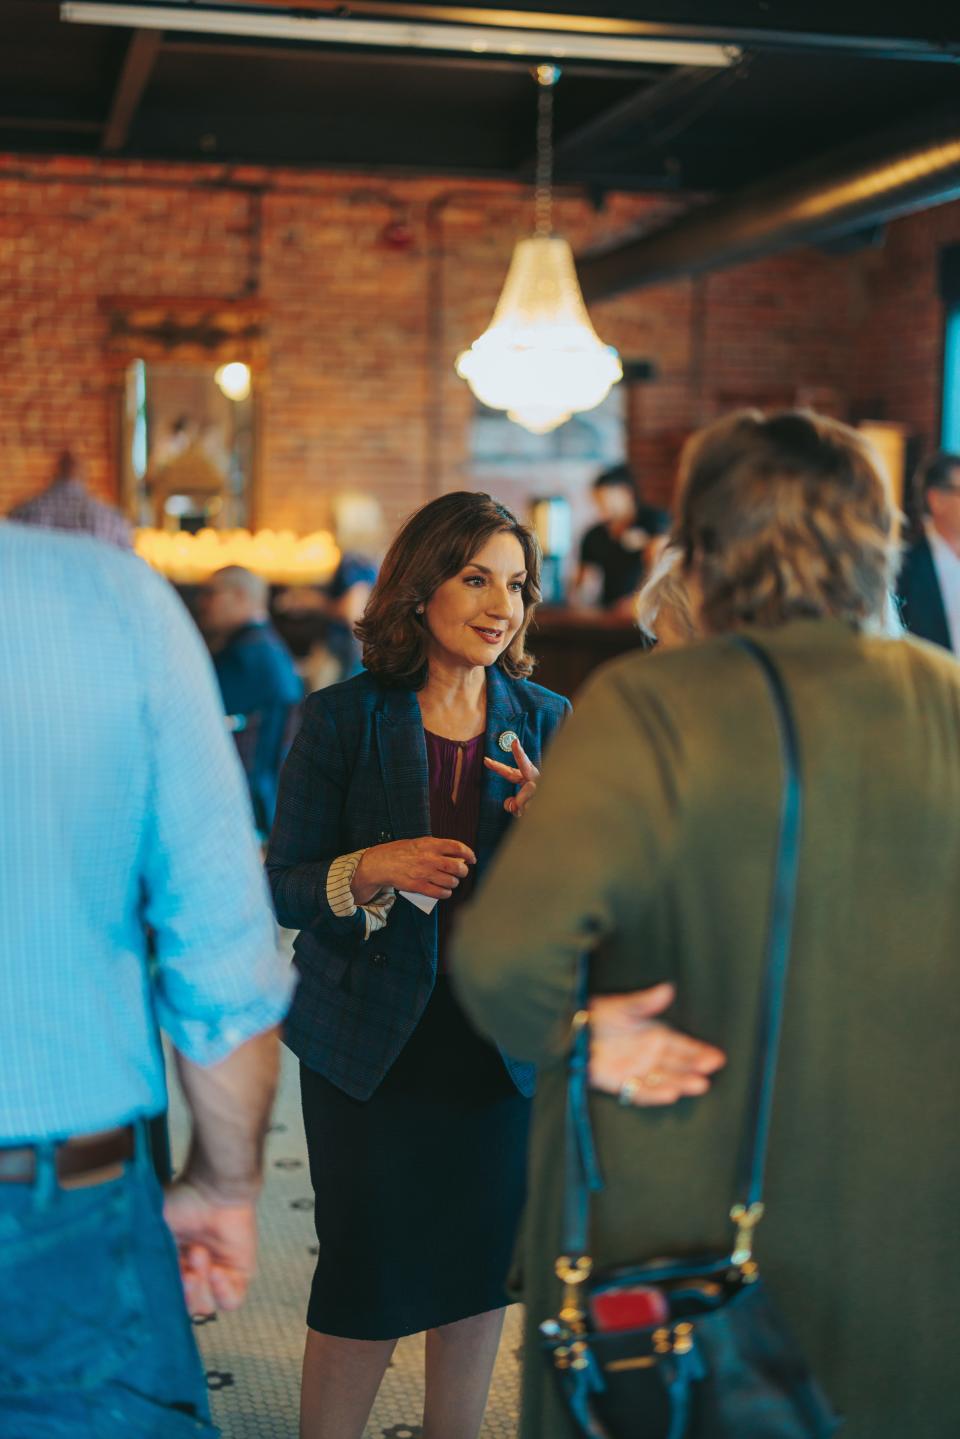 State schools Superintendent Joy Hofmeister, a gubernatorial candidate,  speaks one-on-one with attendees at her campaign fundraiser in the Johnstone-Sare Building on Wednesday.